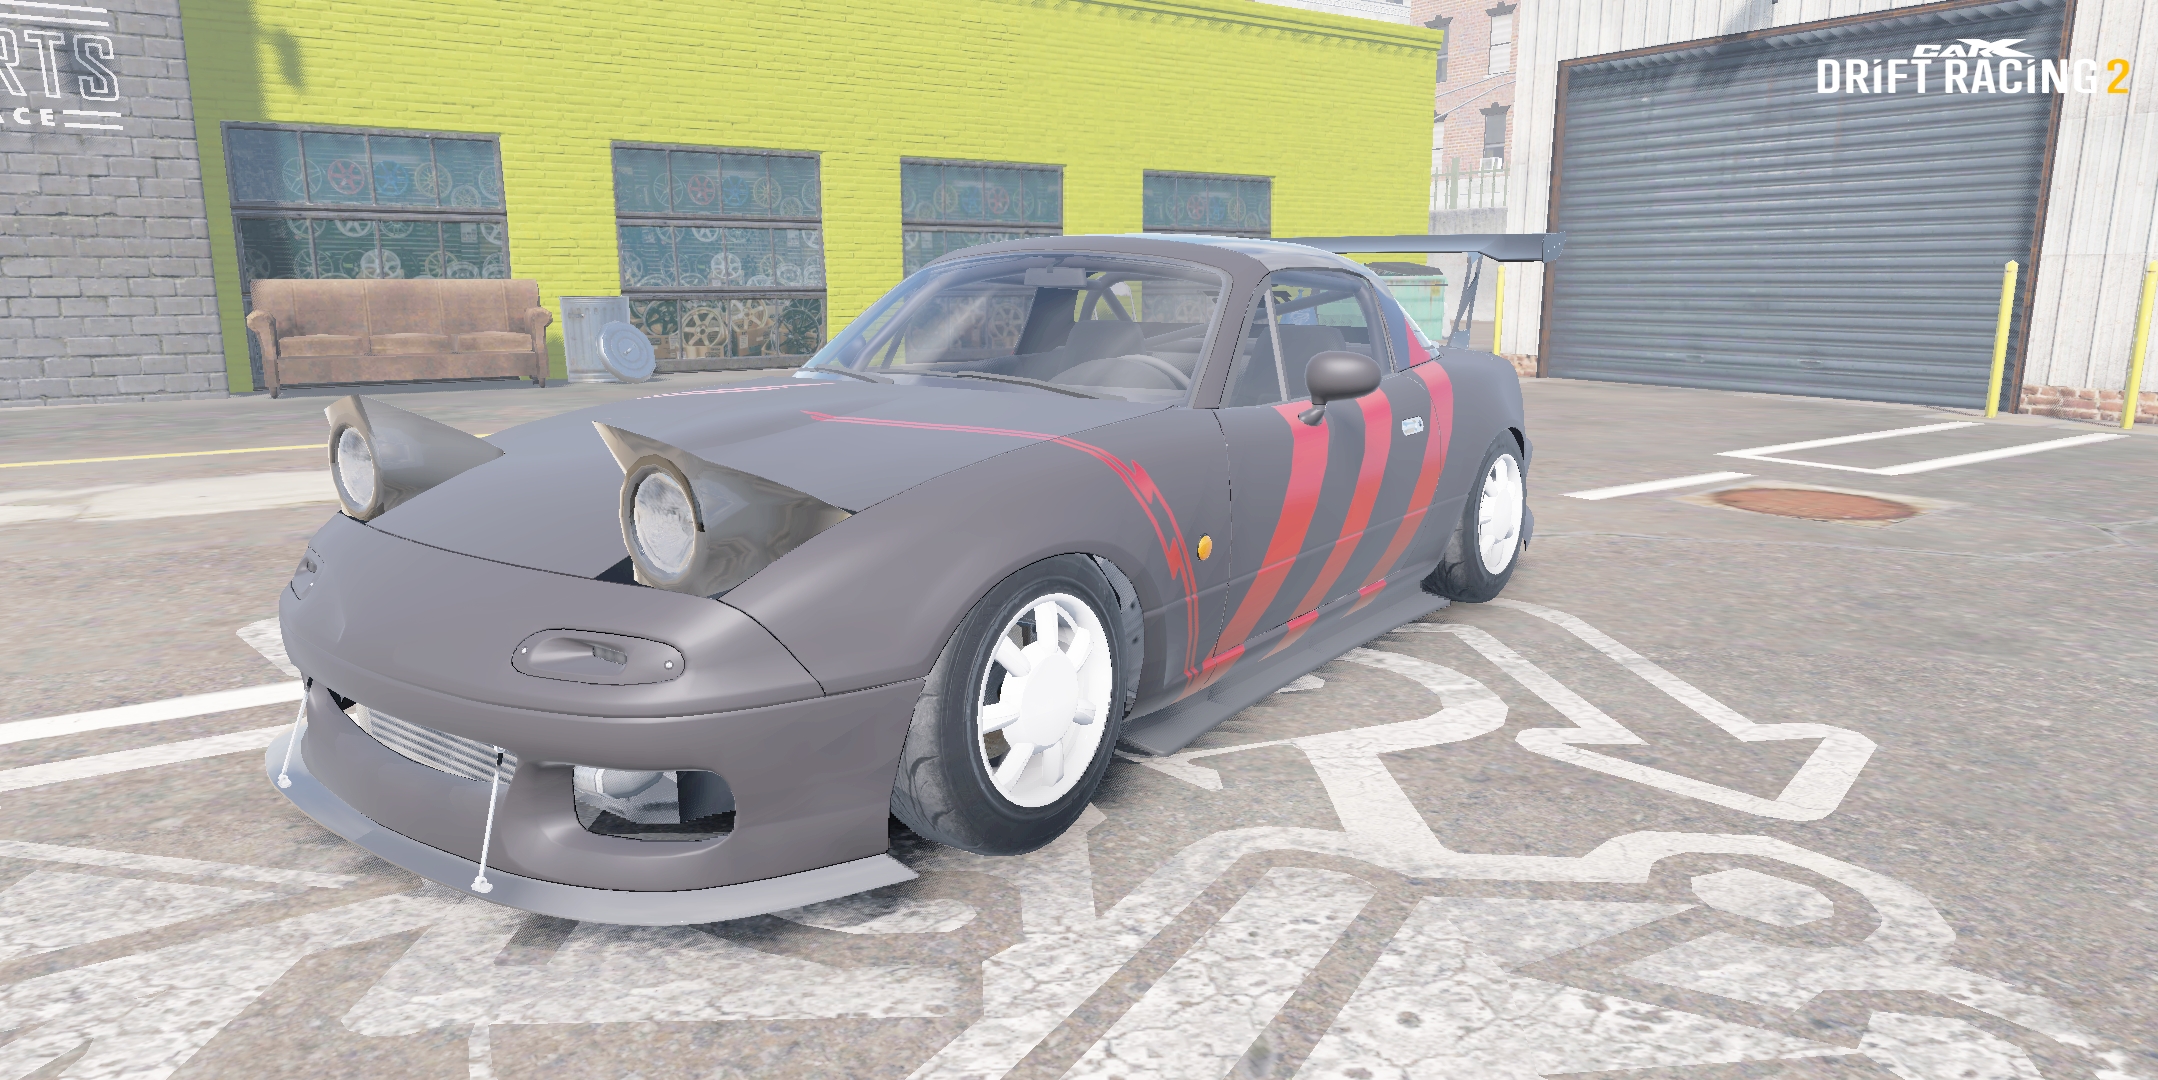 High Quality miata red and black livery Blank Meme Template